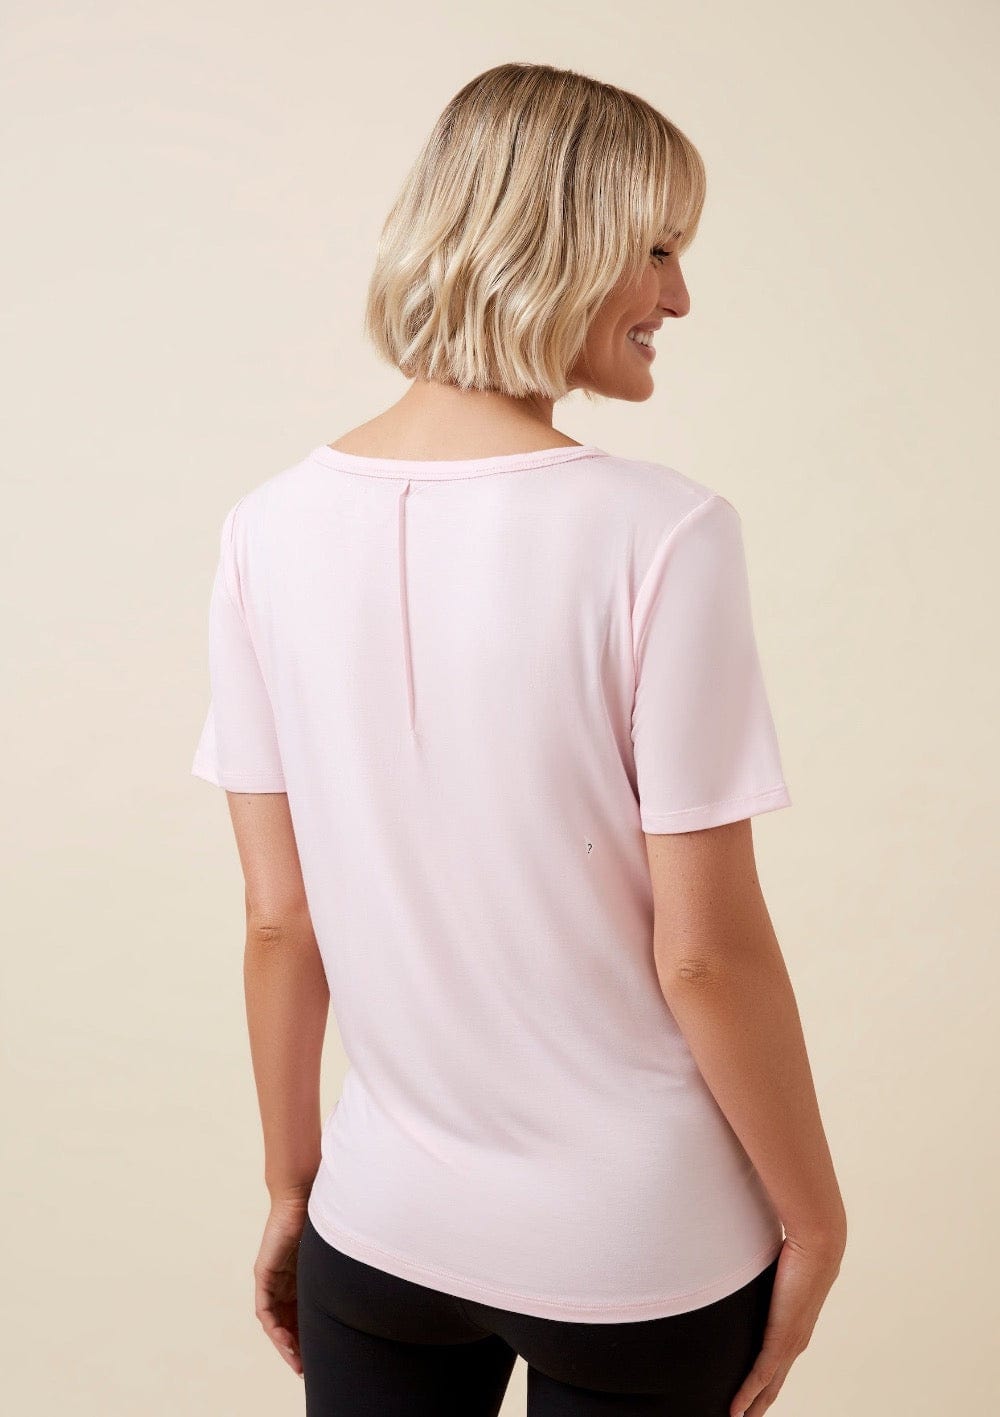 Thery Group TEE Powder Pink The Me Bamboo Slouch Tee  - back view pregnant mother